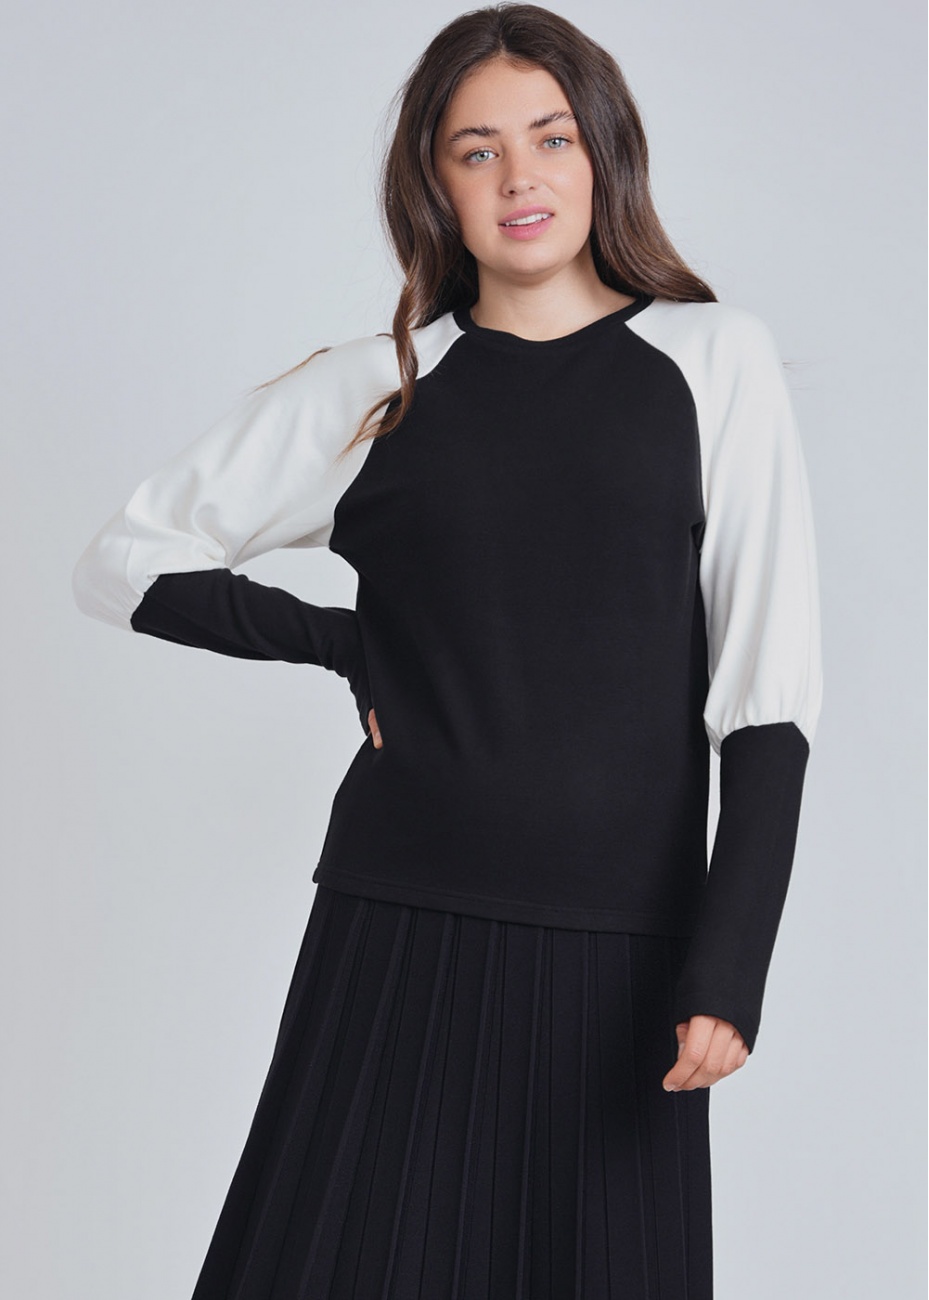 Classic Color Block Long Sleeve Tee: Black & White